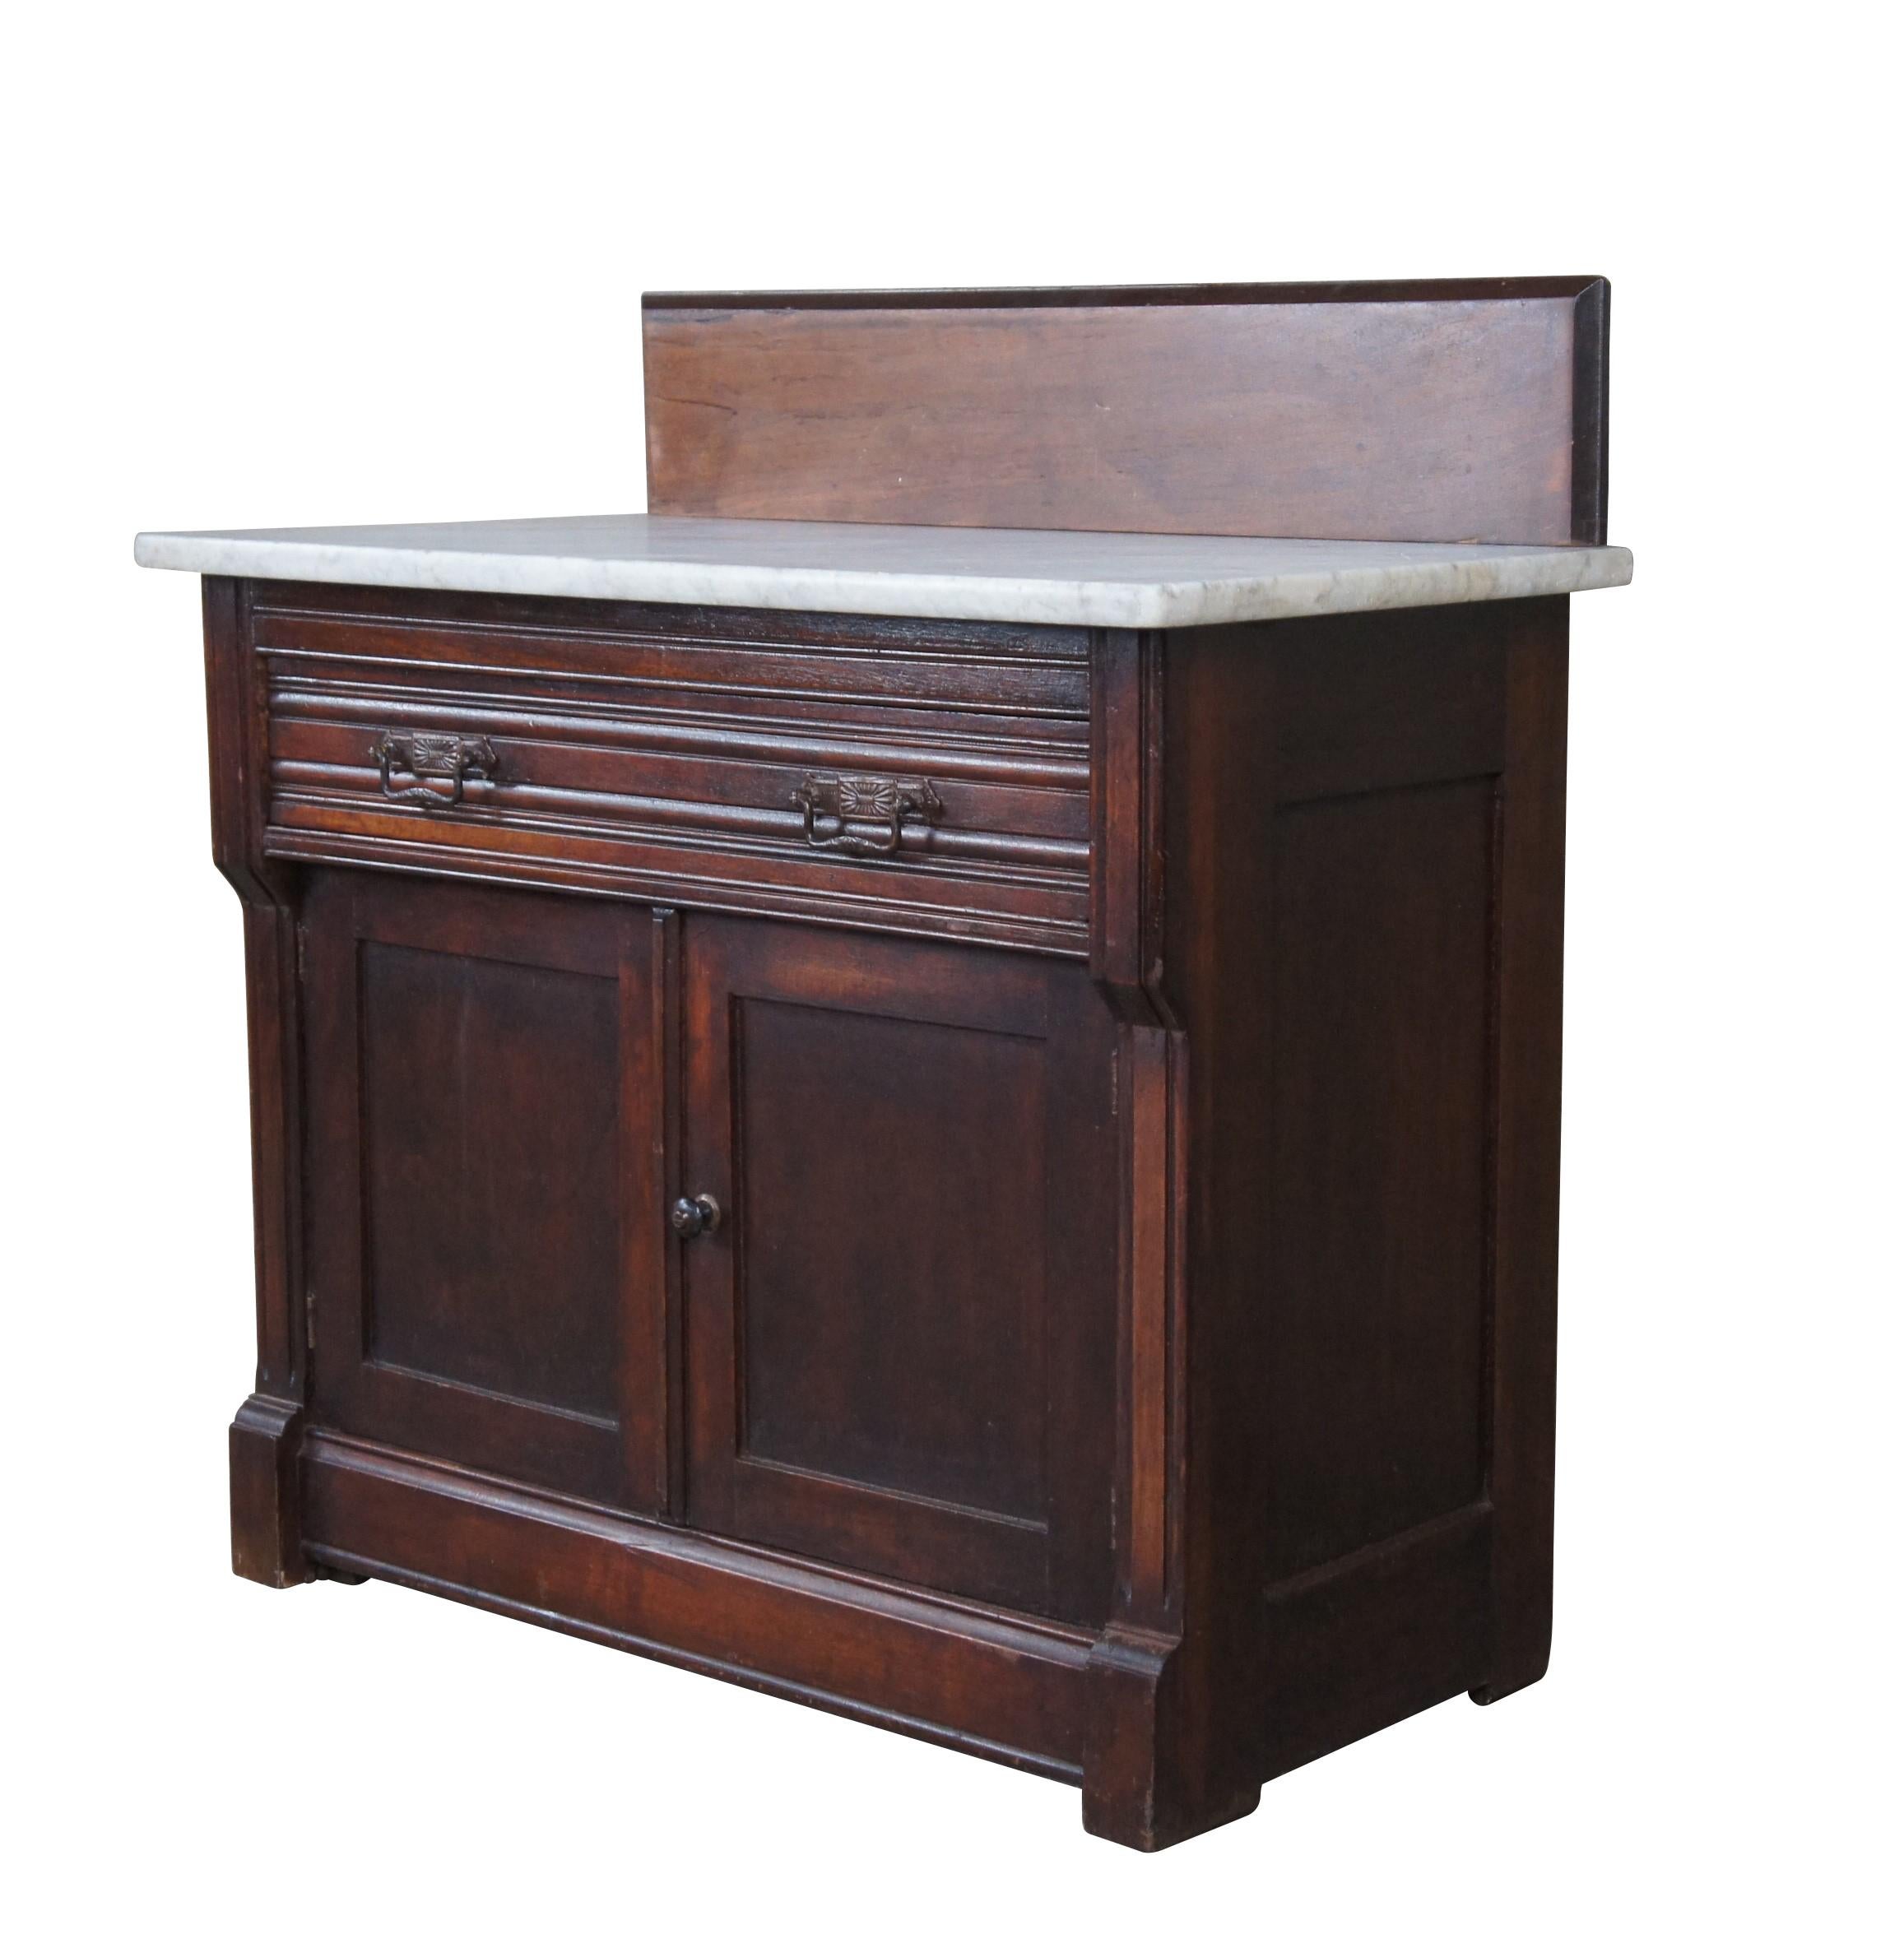 Antique Victorian wash basin cabinet.  Made of mahogany featuring Eastlake / Aesthetic styling with white marble top over one large drawer and lower cabinet.

Dimensions:
32